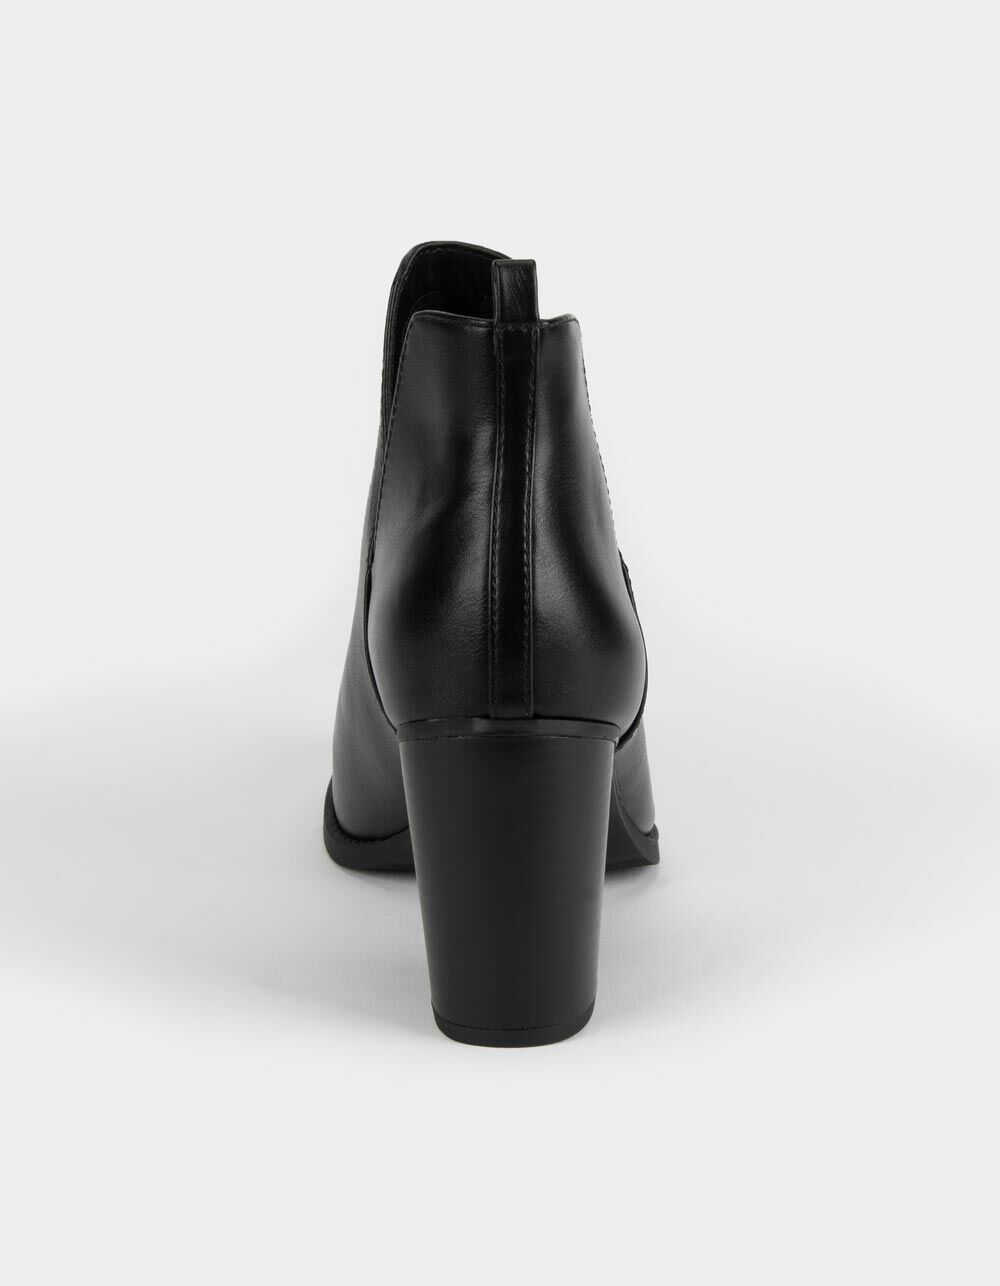 SODA Chop Out Womens Vegan Leather Booties - BLACK | Tillys